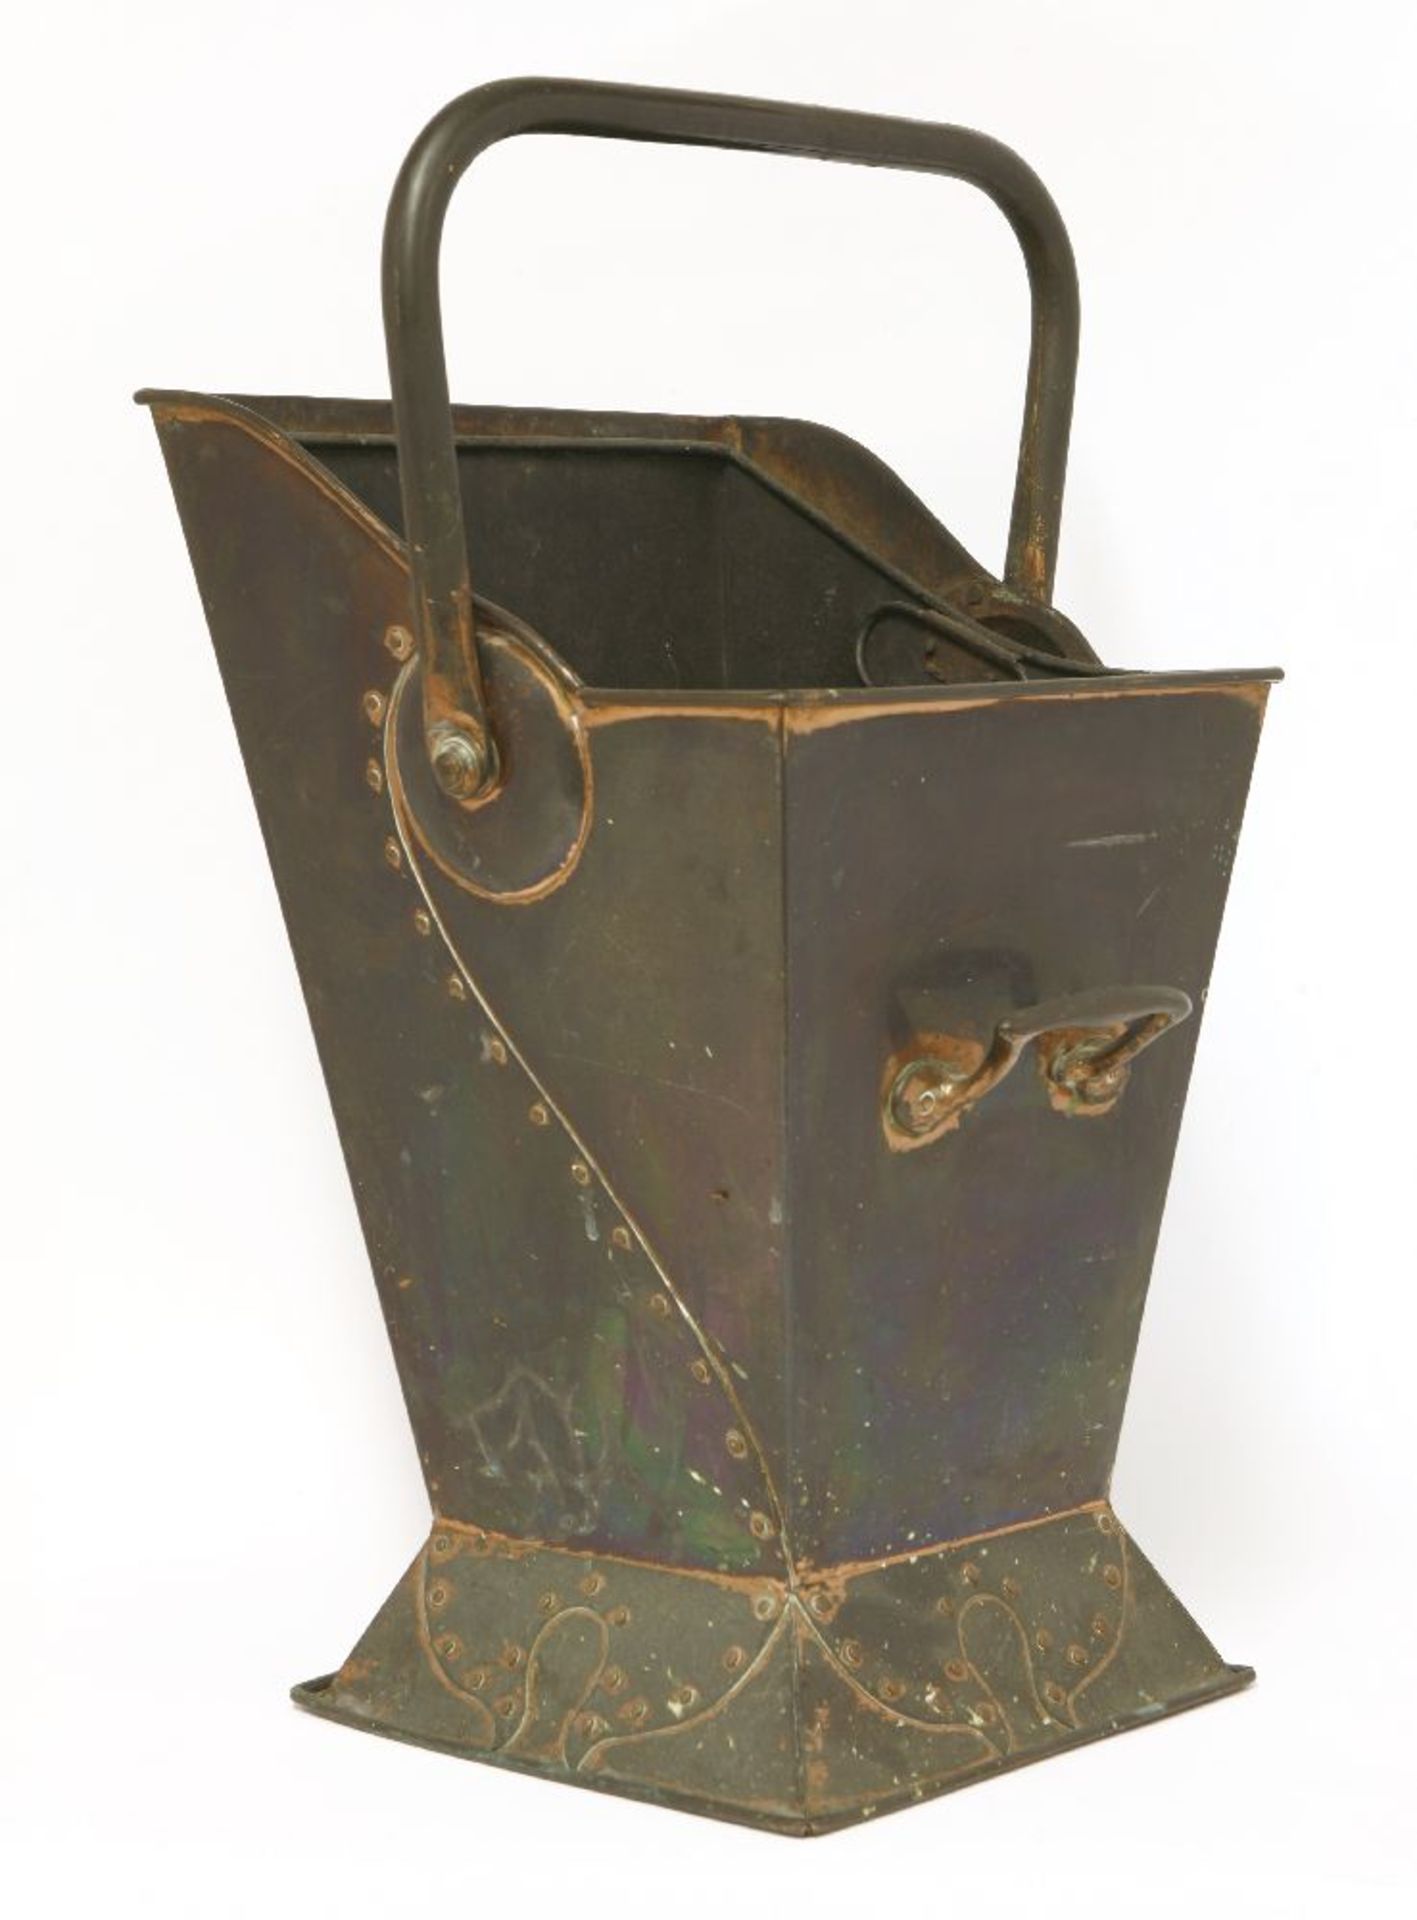 A copper coal scuttle, with riveted panels and embossed with a stylised pomegranate, with a swing